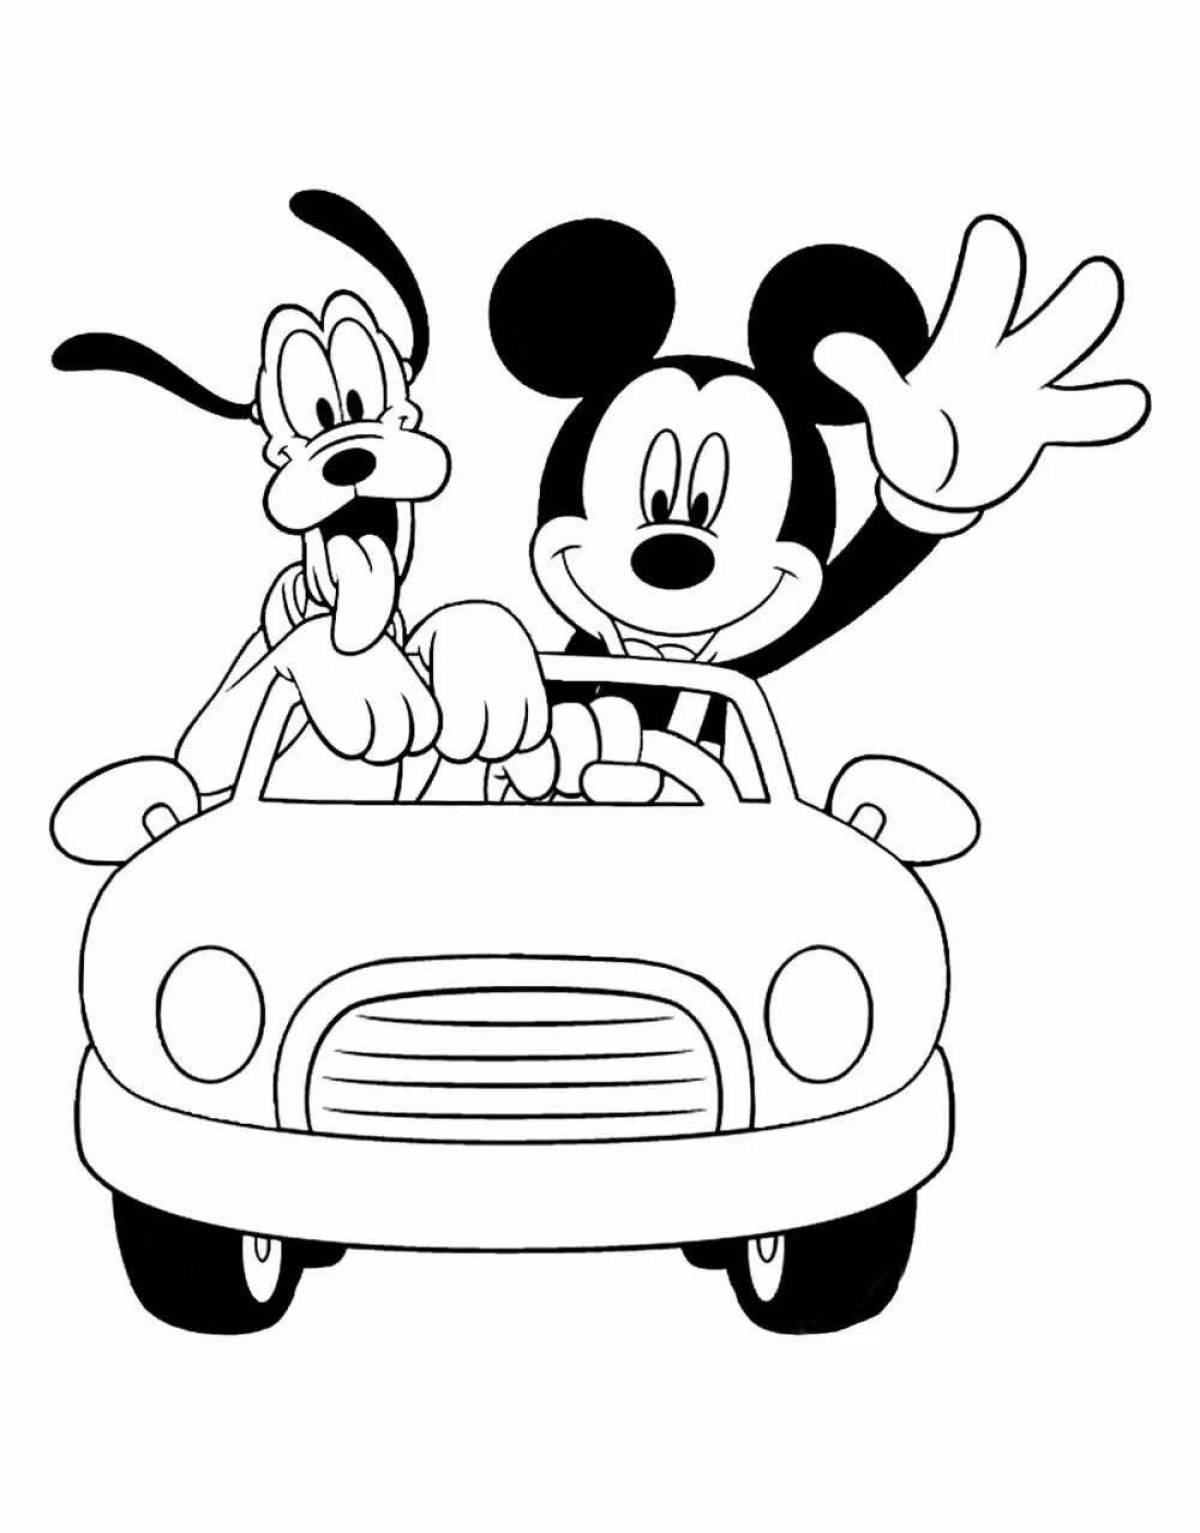 Mickey Mouse Club party coloring page